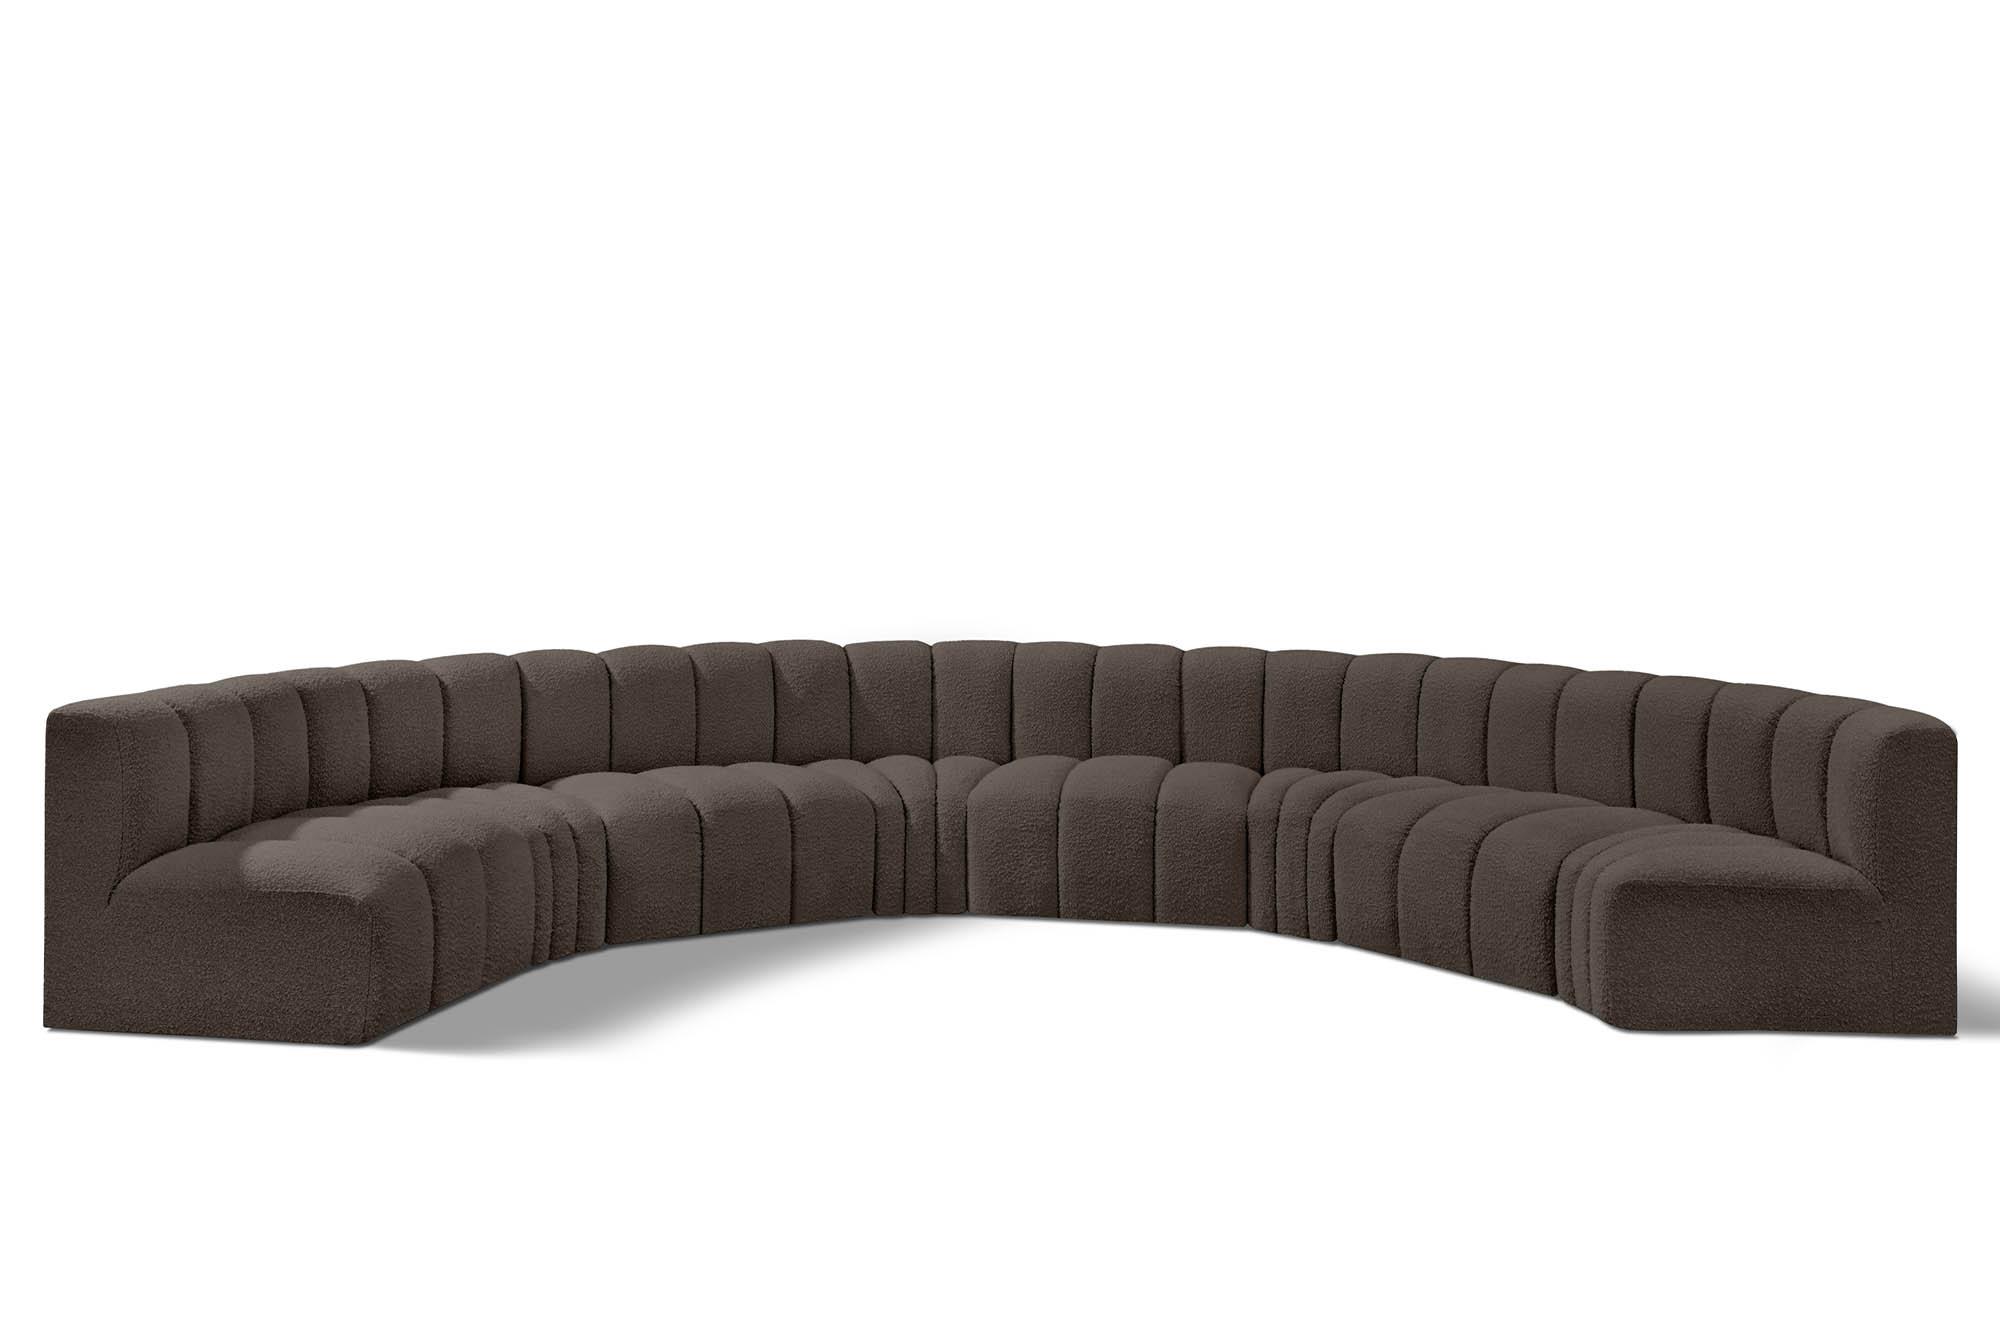 Contemporary, Modern Modular Sectional Sofa ARC 102Brown-S8B 102Brown-S8B in Brown 